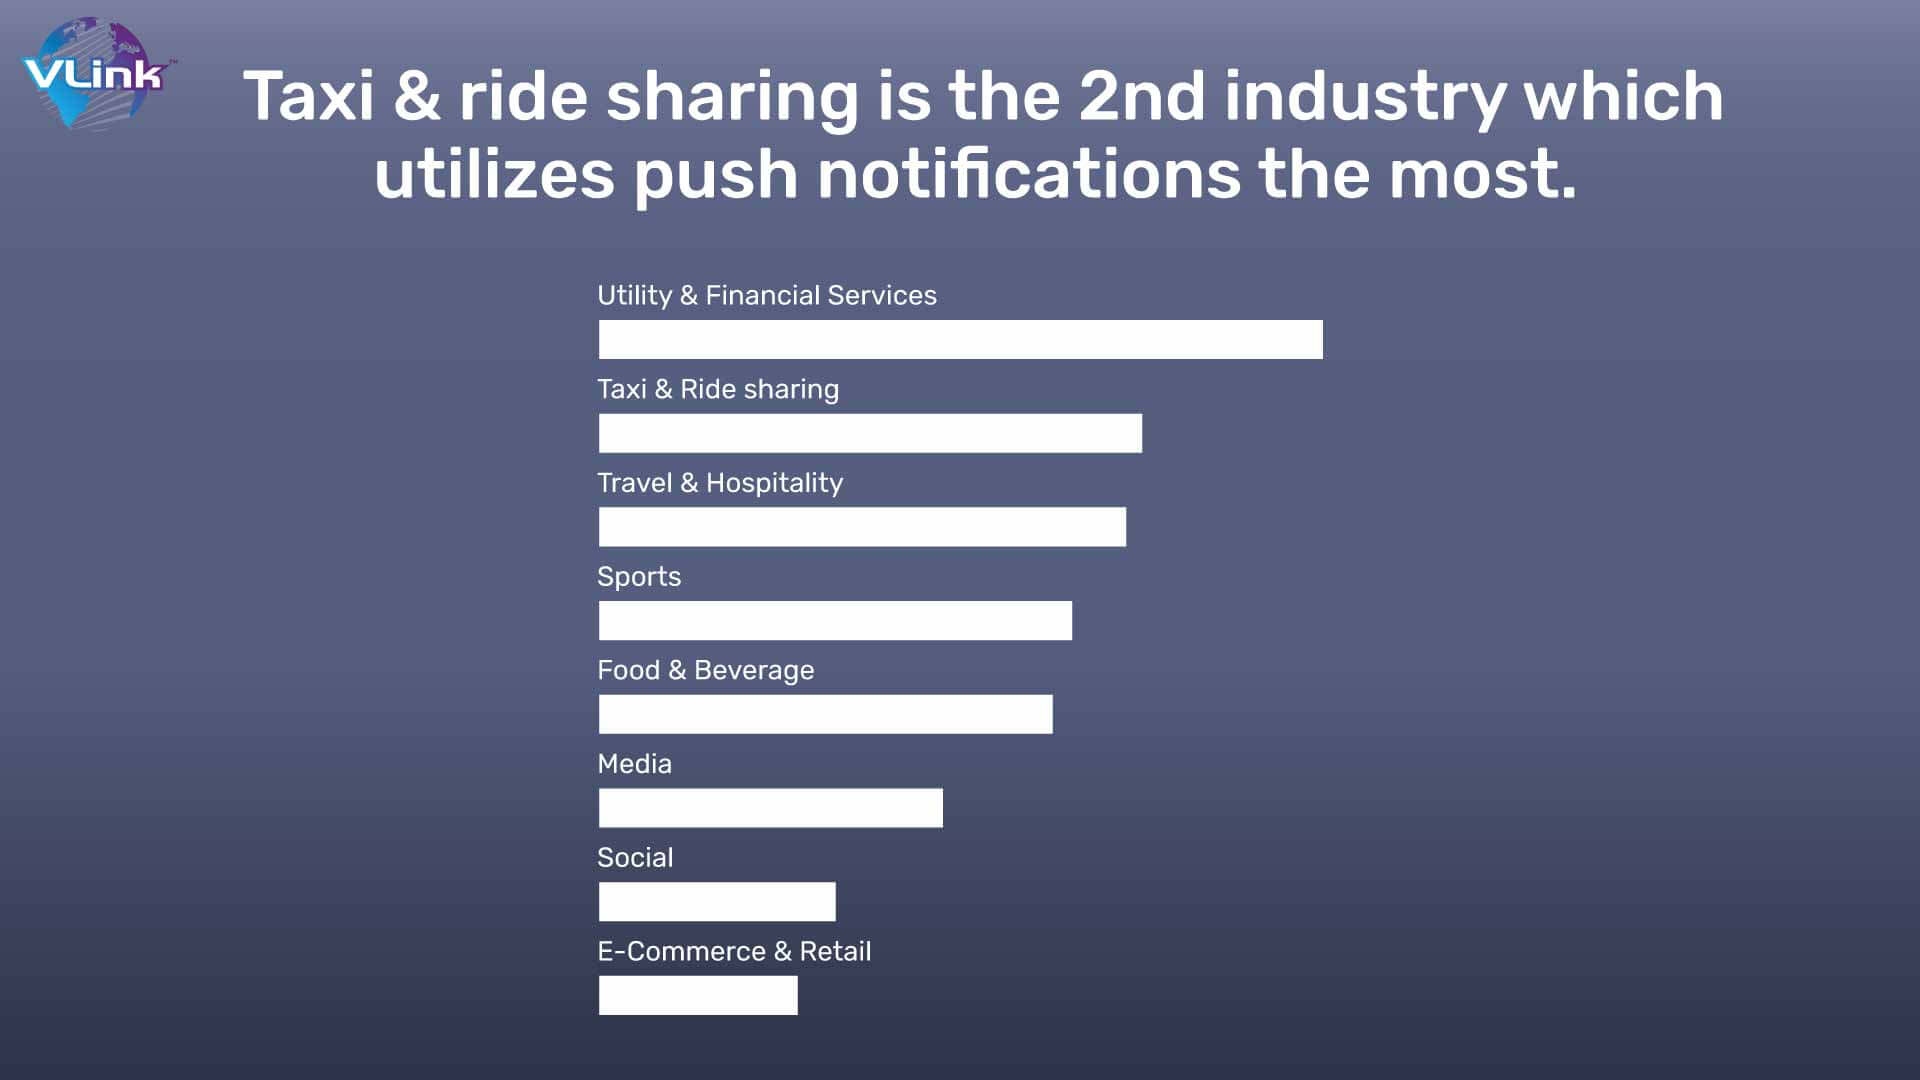 Taxi & ride sharing is the 2nd industry which utilizes push notifications the most